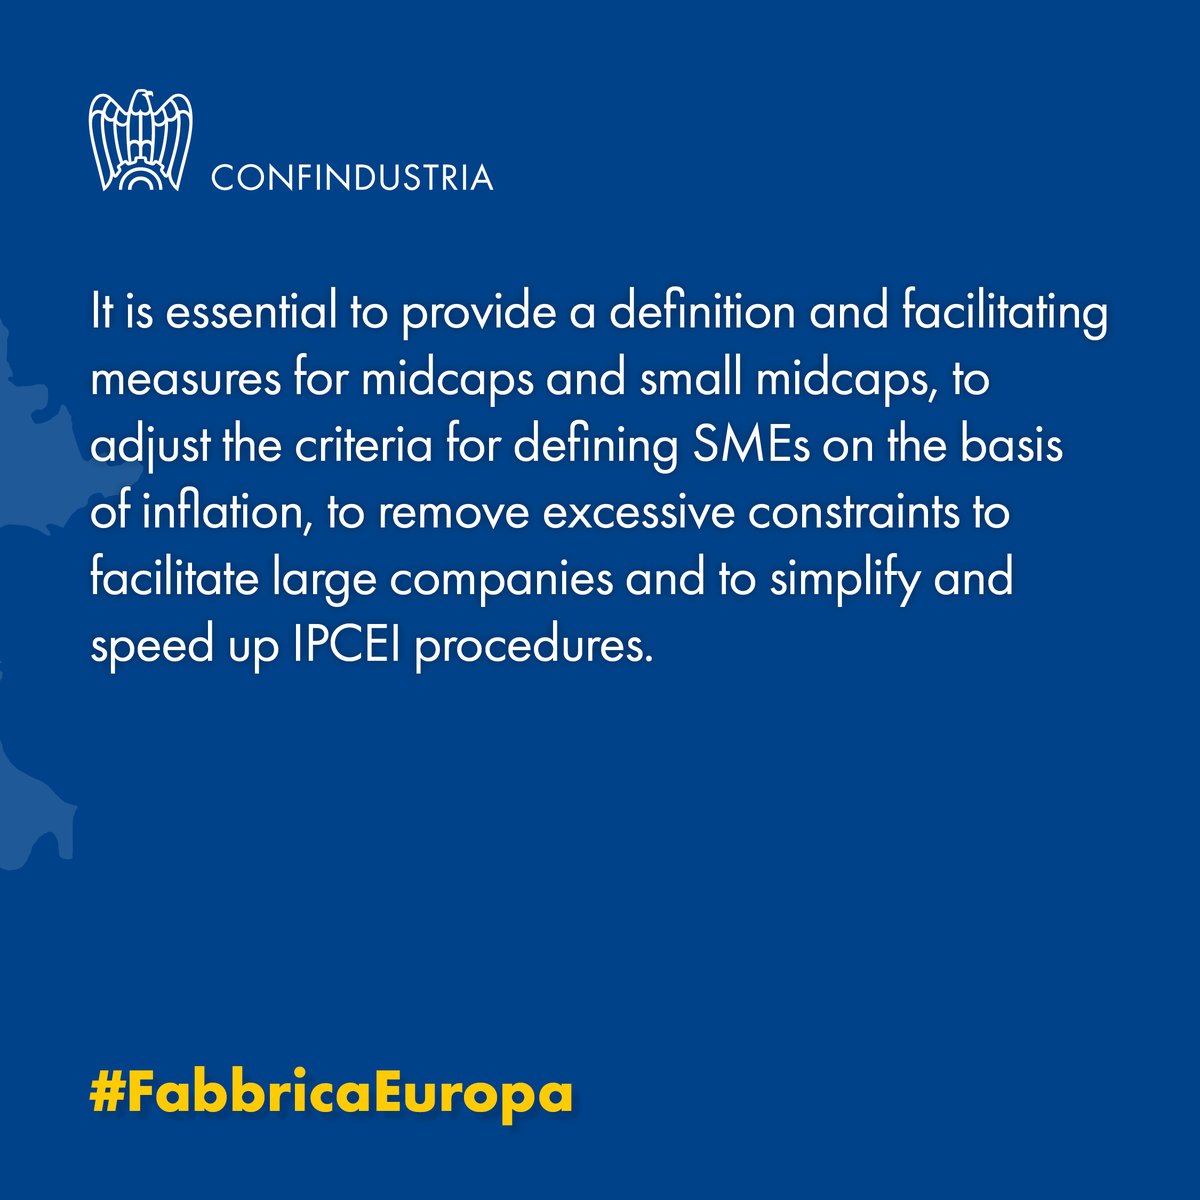 ✍️When the Temporary Crisis and Transition Framework adopted in response to the energy emergency two years ago expires, the existing rules will need to be adjusted.

👉Find out more about #FabbricaEuropa: rb.gy/9z88aw

#EUelections2024 #UseYourVote